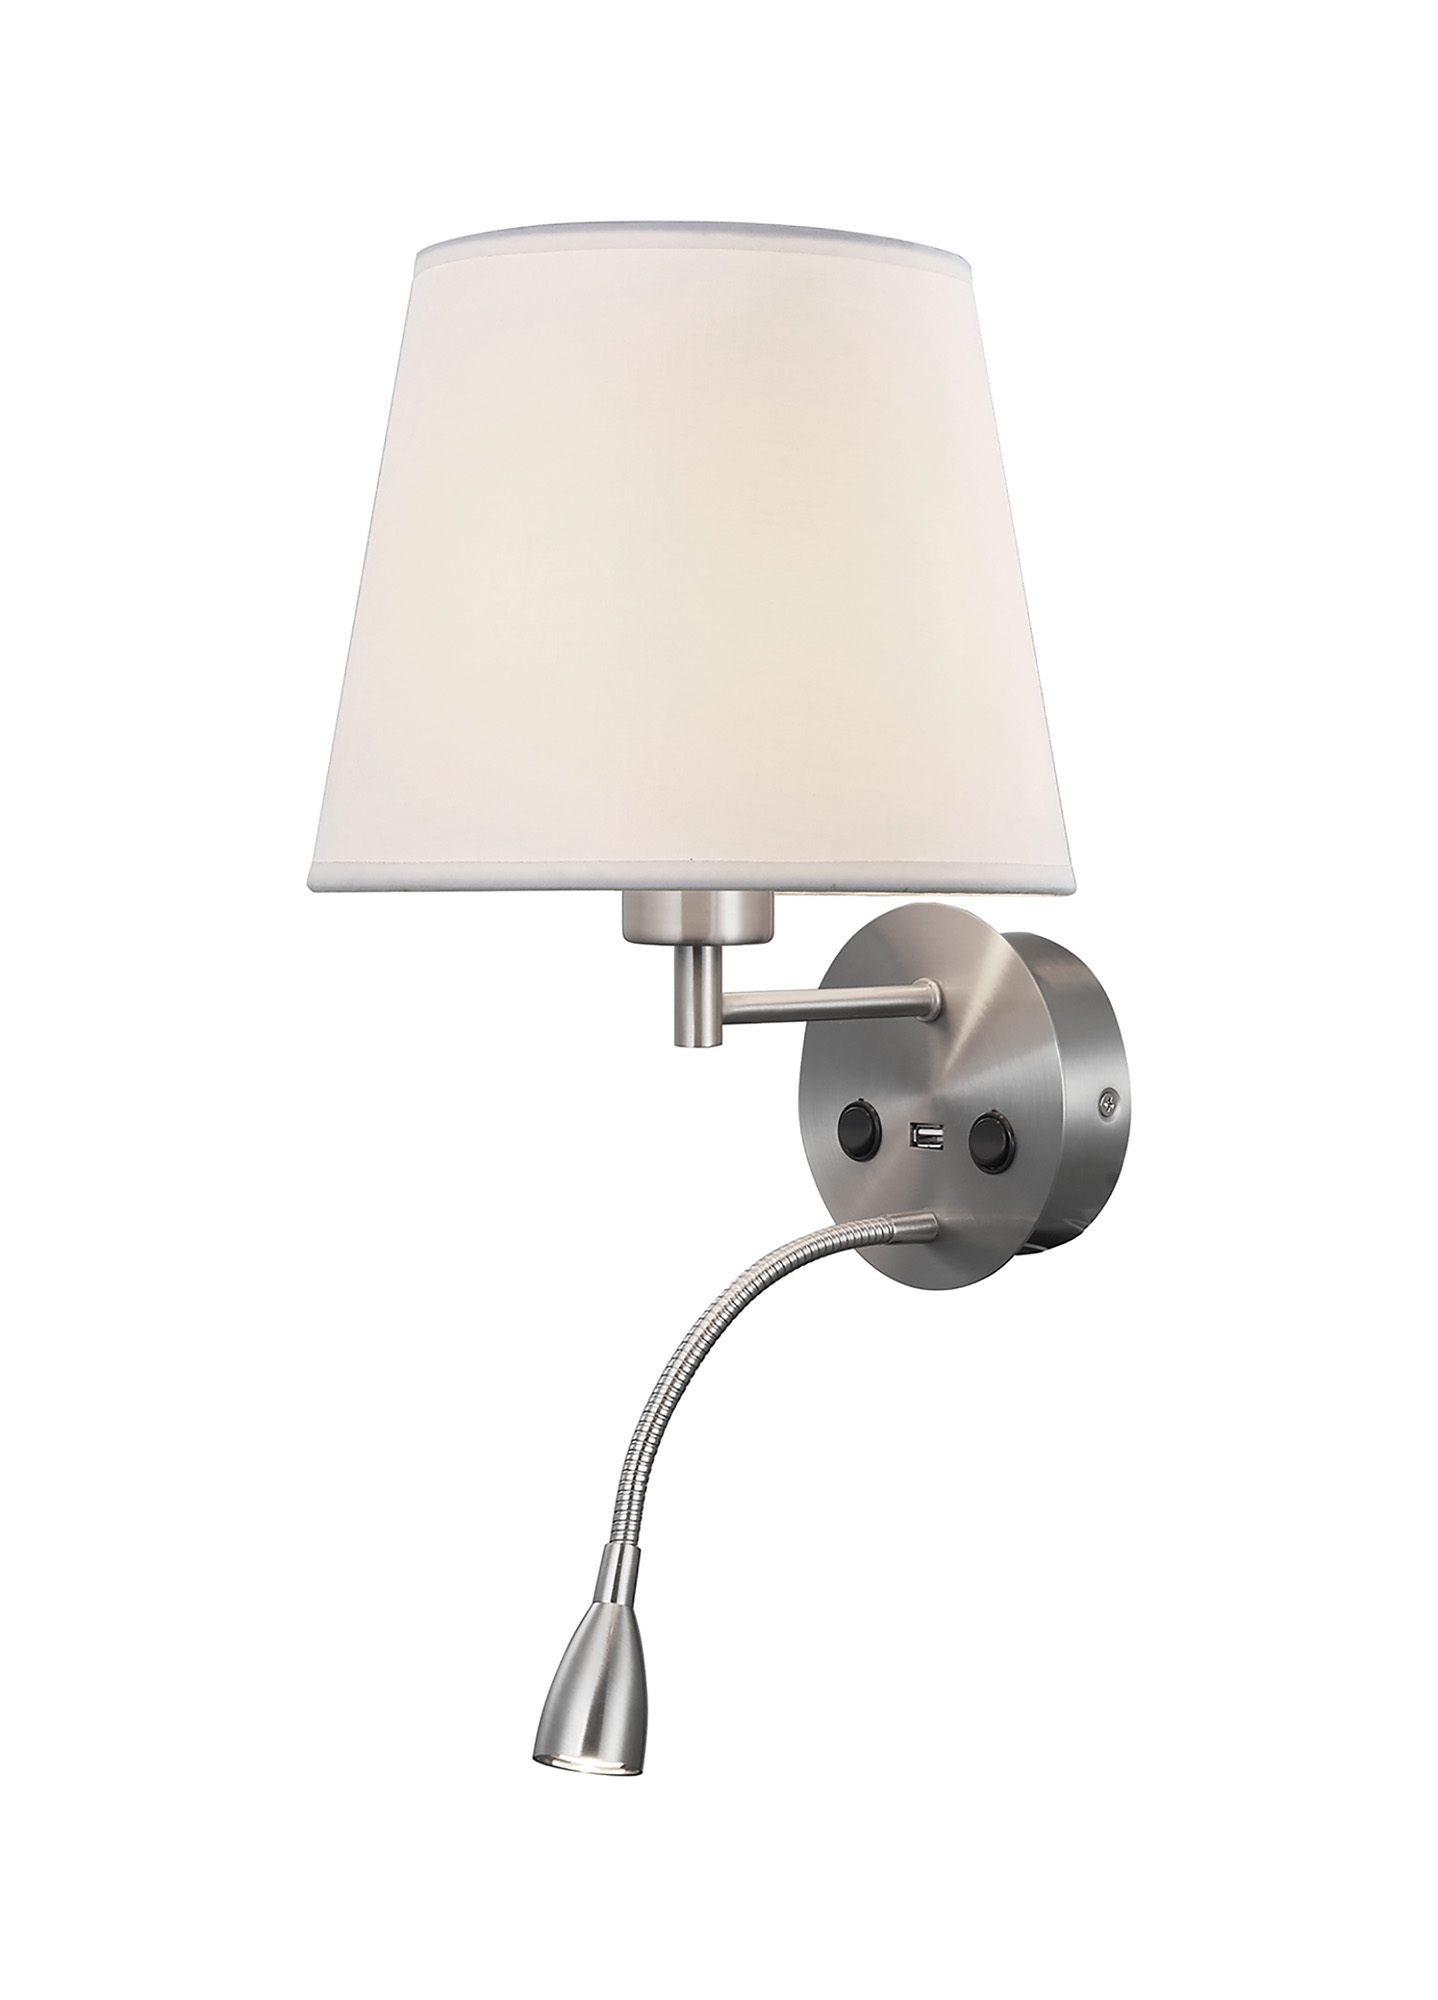 M6092  Caicos Wall + Reading Light 1 E27 + 3W LED Switched Satin Nickel